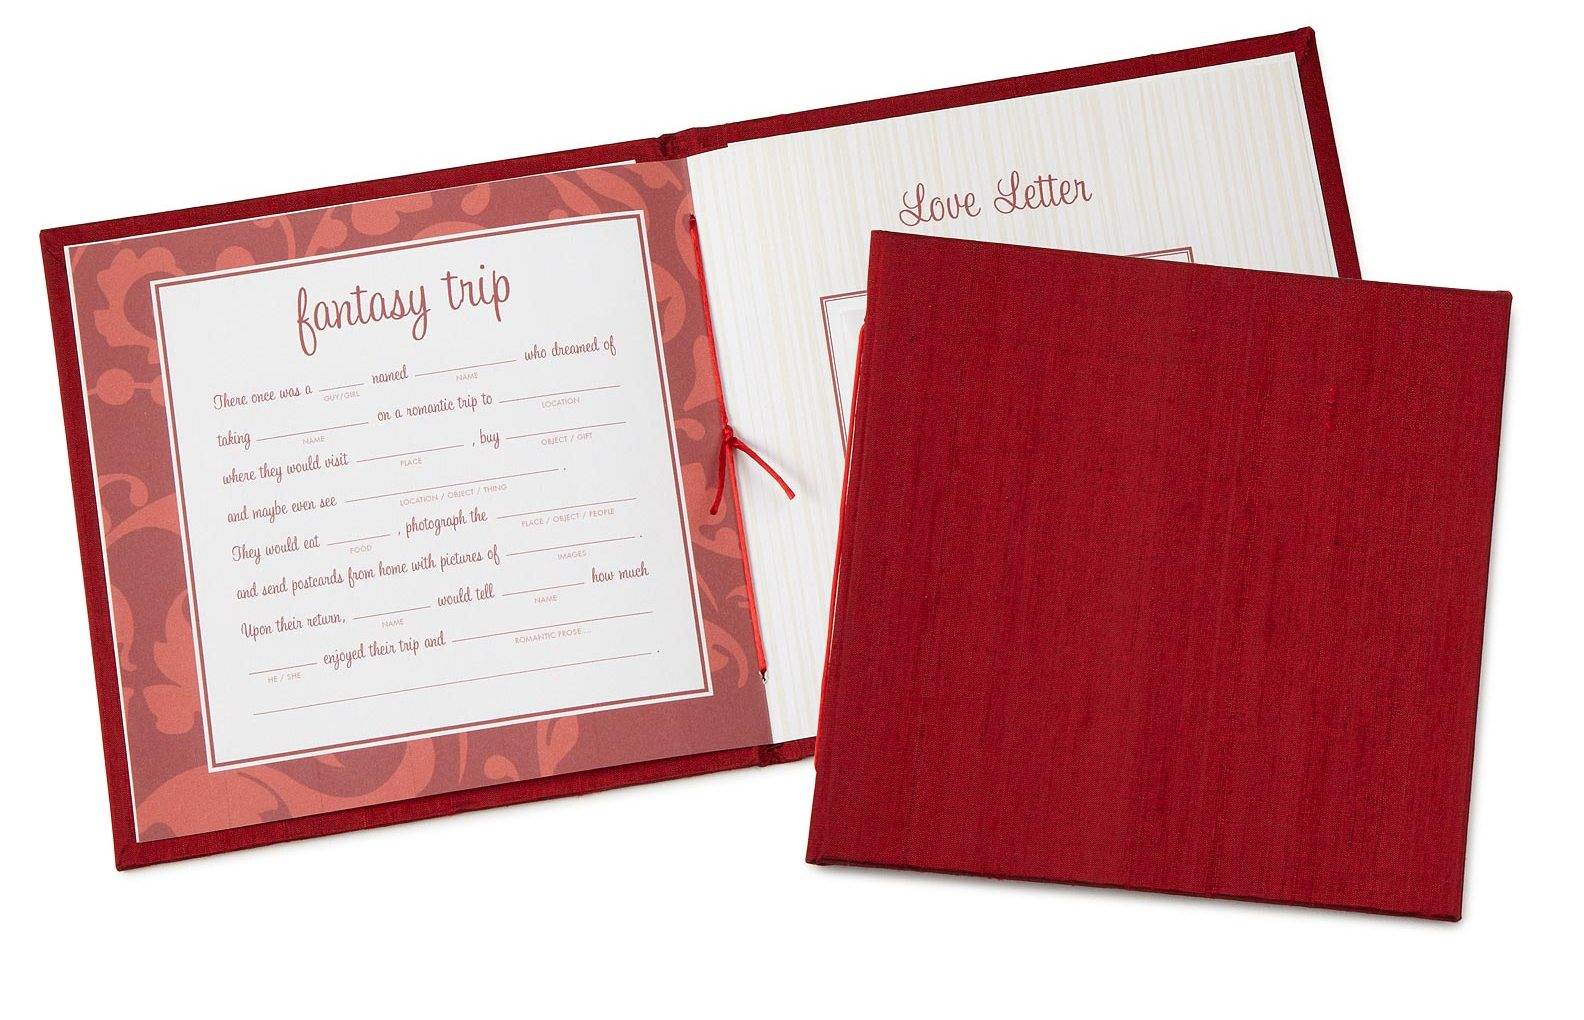 Uncommon Goods Diary- Gifts for the Groom as featured on The National Vintage Wedding Fair blog